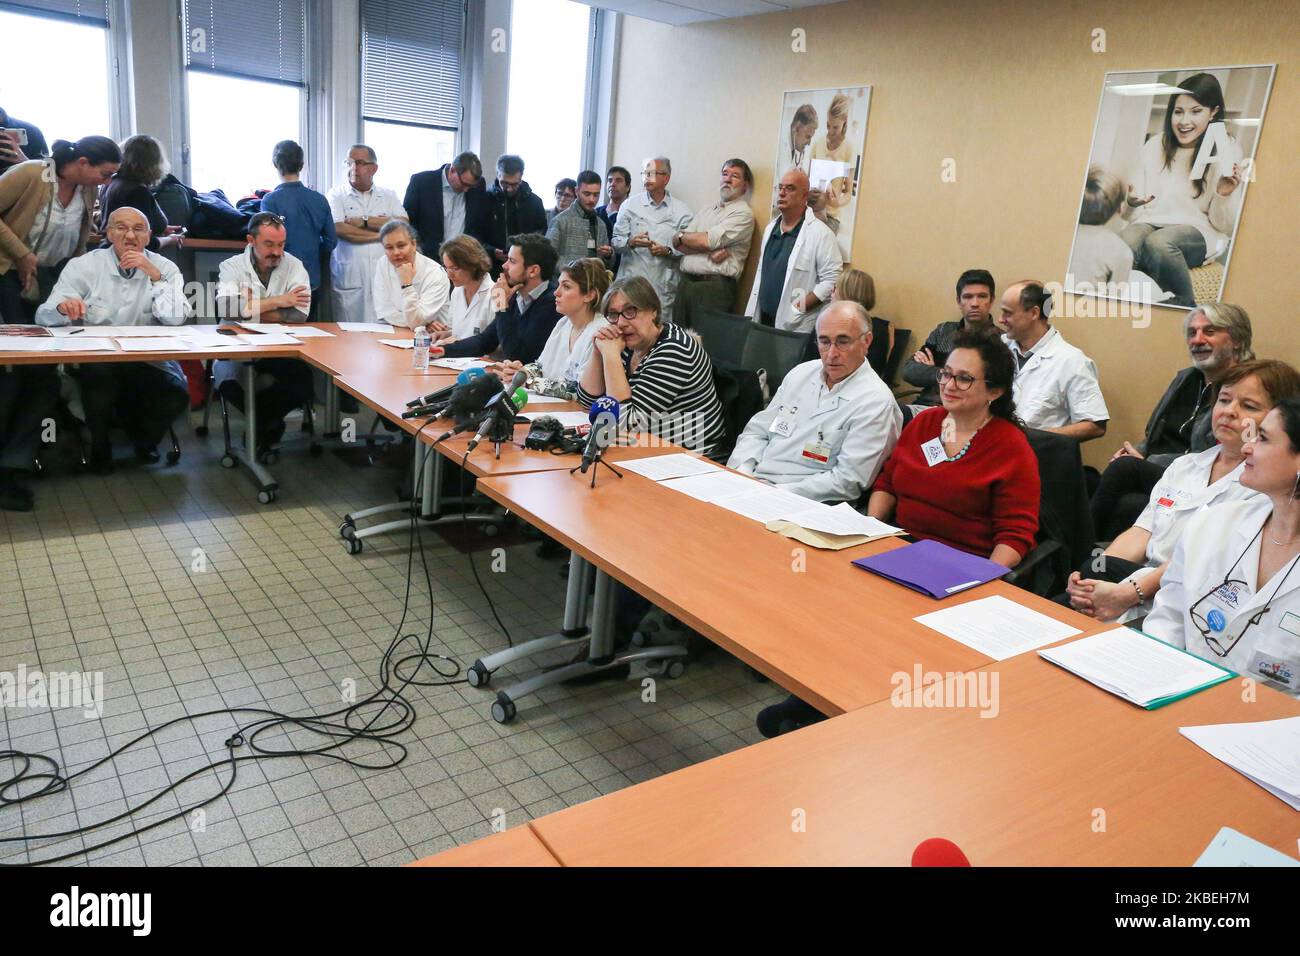 Members of the 'CIH - Collectif Inter Hopitaux' (Inter-hospitals collective) give a press conference after the publication of a collective resignation letter to protest against the emergency plan proposed by the government, at the Pitie-Salpetriere hospital in Paris on January 14, 2020. More than 1,000 hospital doctors, including some 600 heads of medical departments, published on January 14 a letter to 'collectively resign' from their administrative duties if French Health and Solidarity Minister does not start 'negotiations' on the hospital's budget and salaries. (Photo by Michel Stoupak/Nur Stock Photo